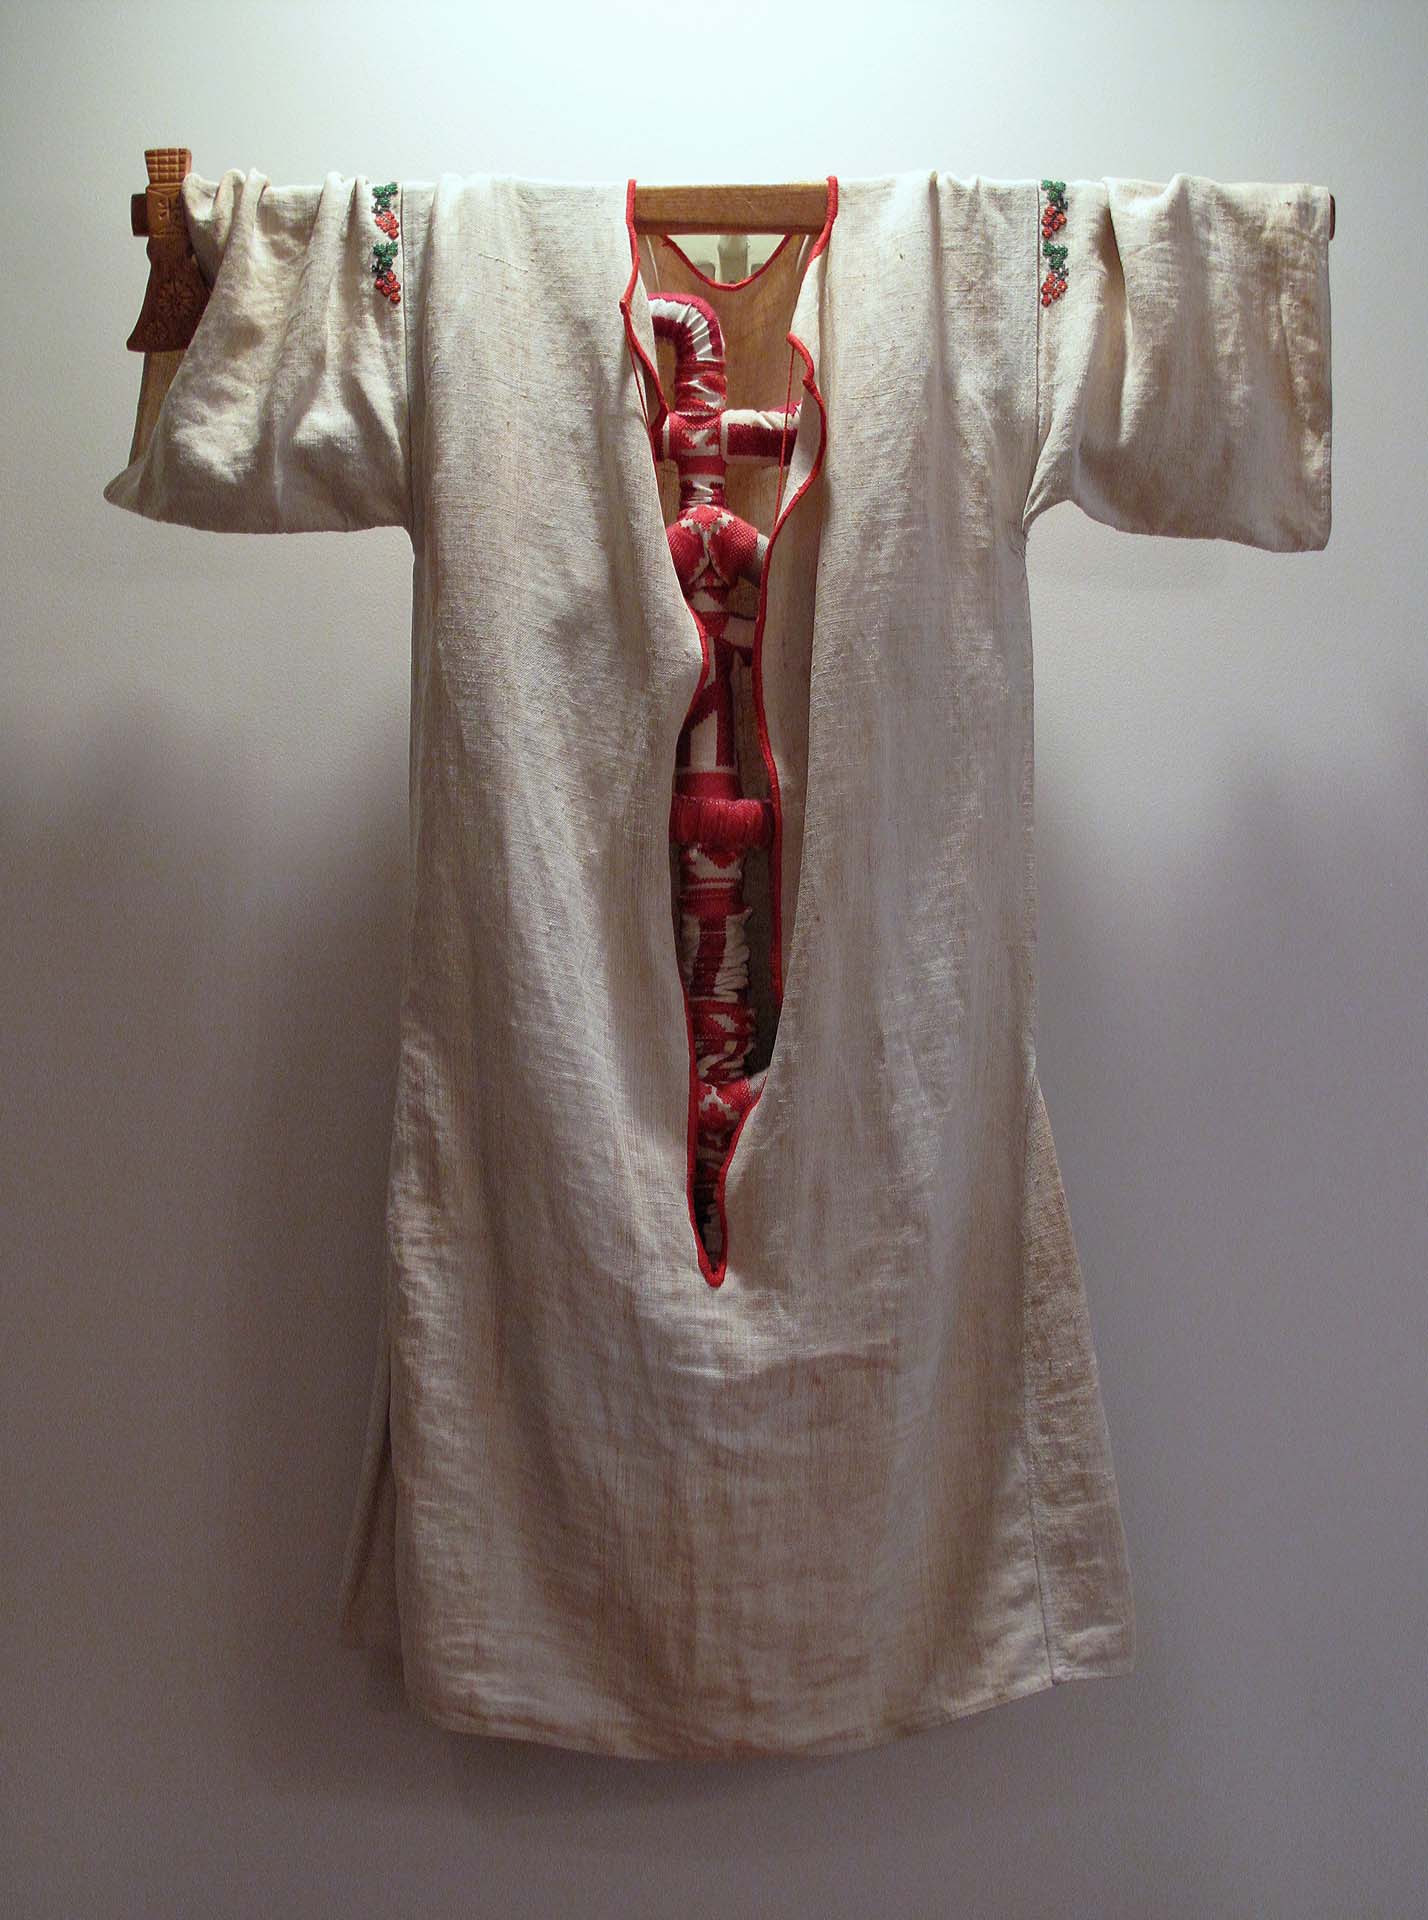 2bf(0) - What Sits In My Guts, embroidered sewn linen, letters, molded tubing, metal rod, wood, 40x32x7 in., 2008-9.jpg